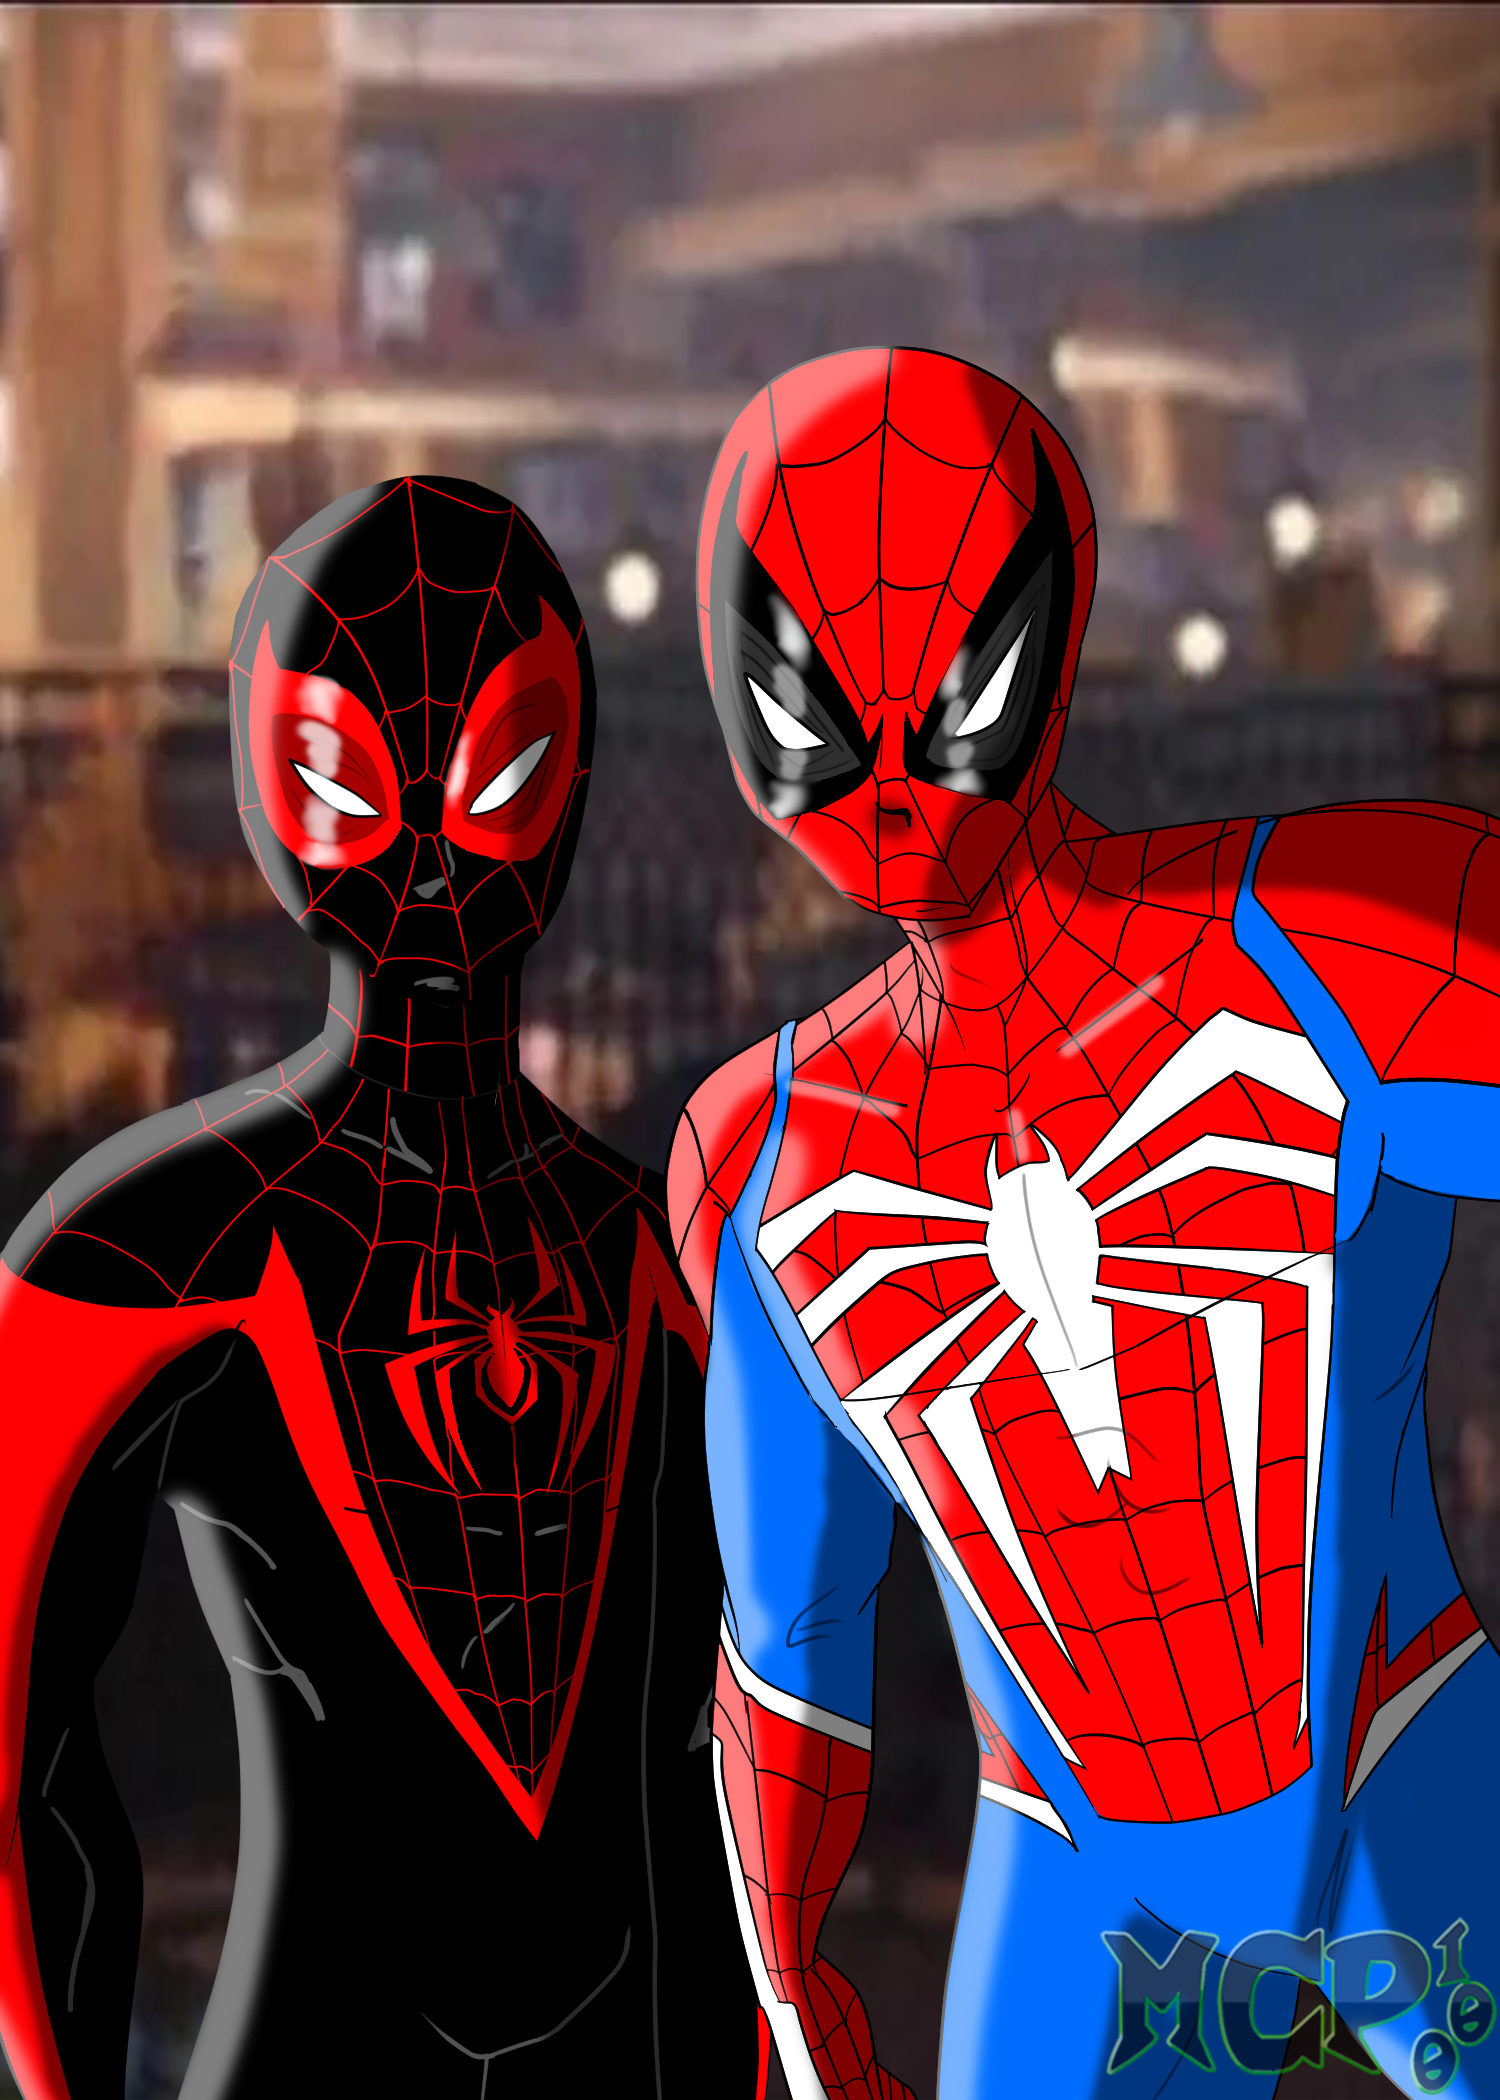 I tried my best to recreate this shot from the Marvel's Spider-Man 2  trailer by editing two photomodes together from Marvel's Spider-Man:  Remastered & Marvel's Spider-Man: Miles Morales, Let me know what